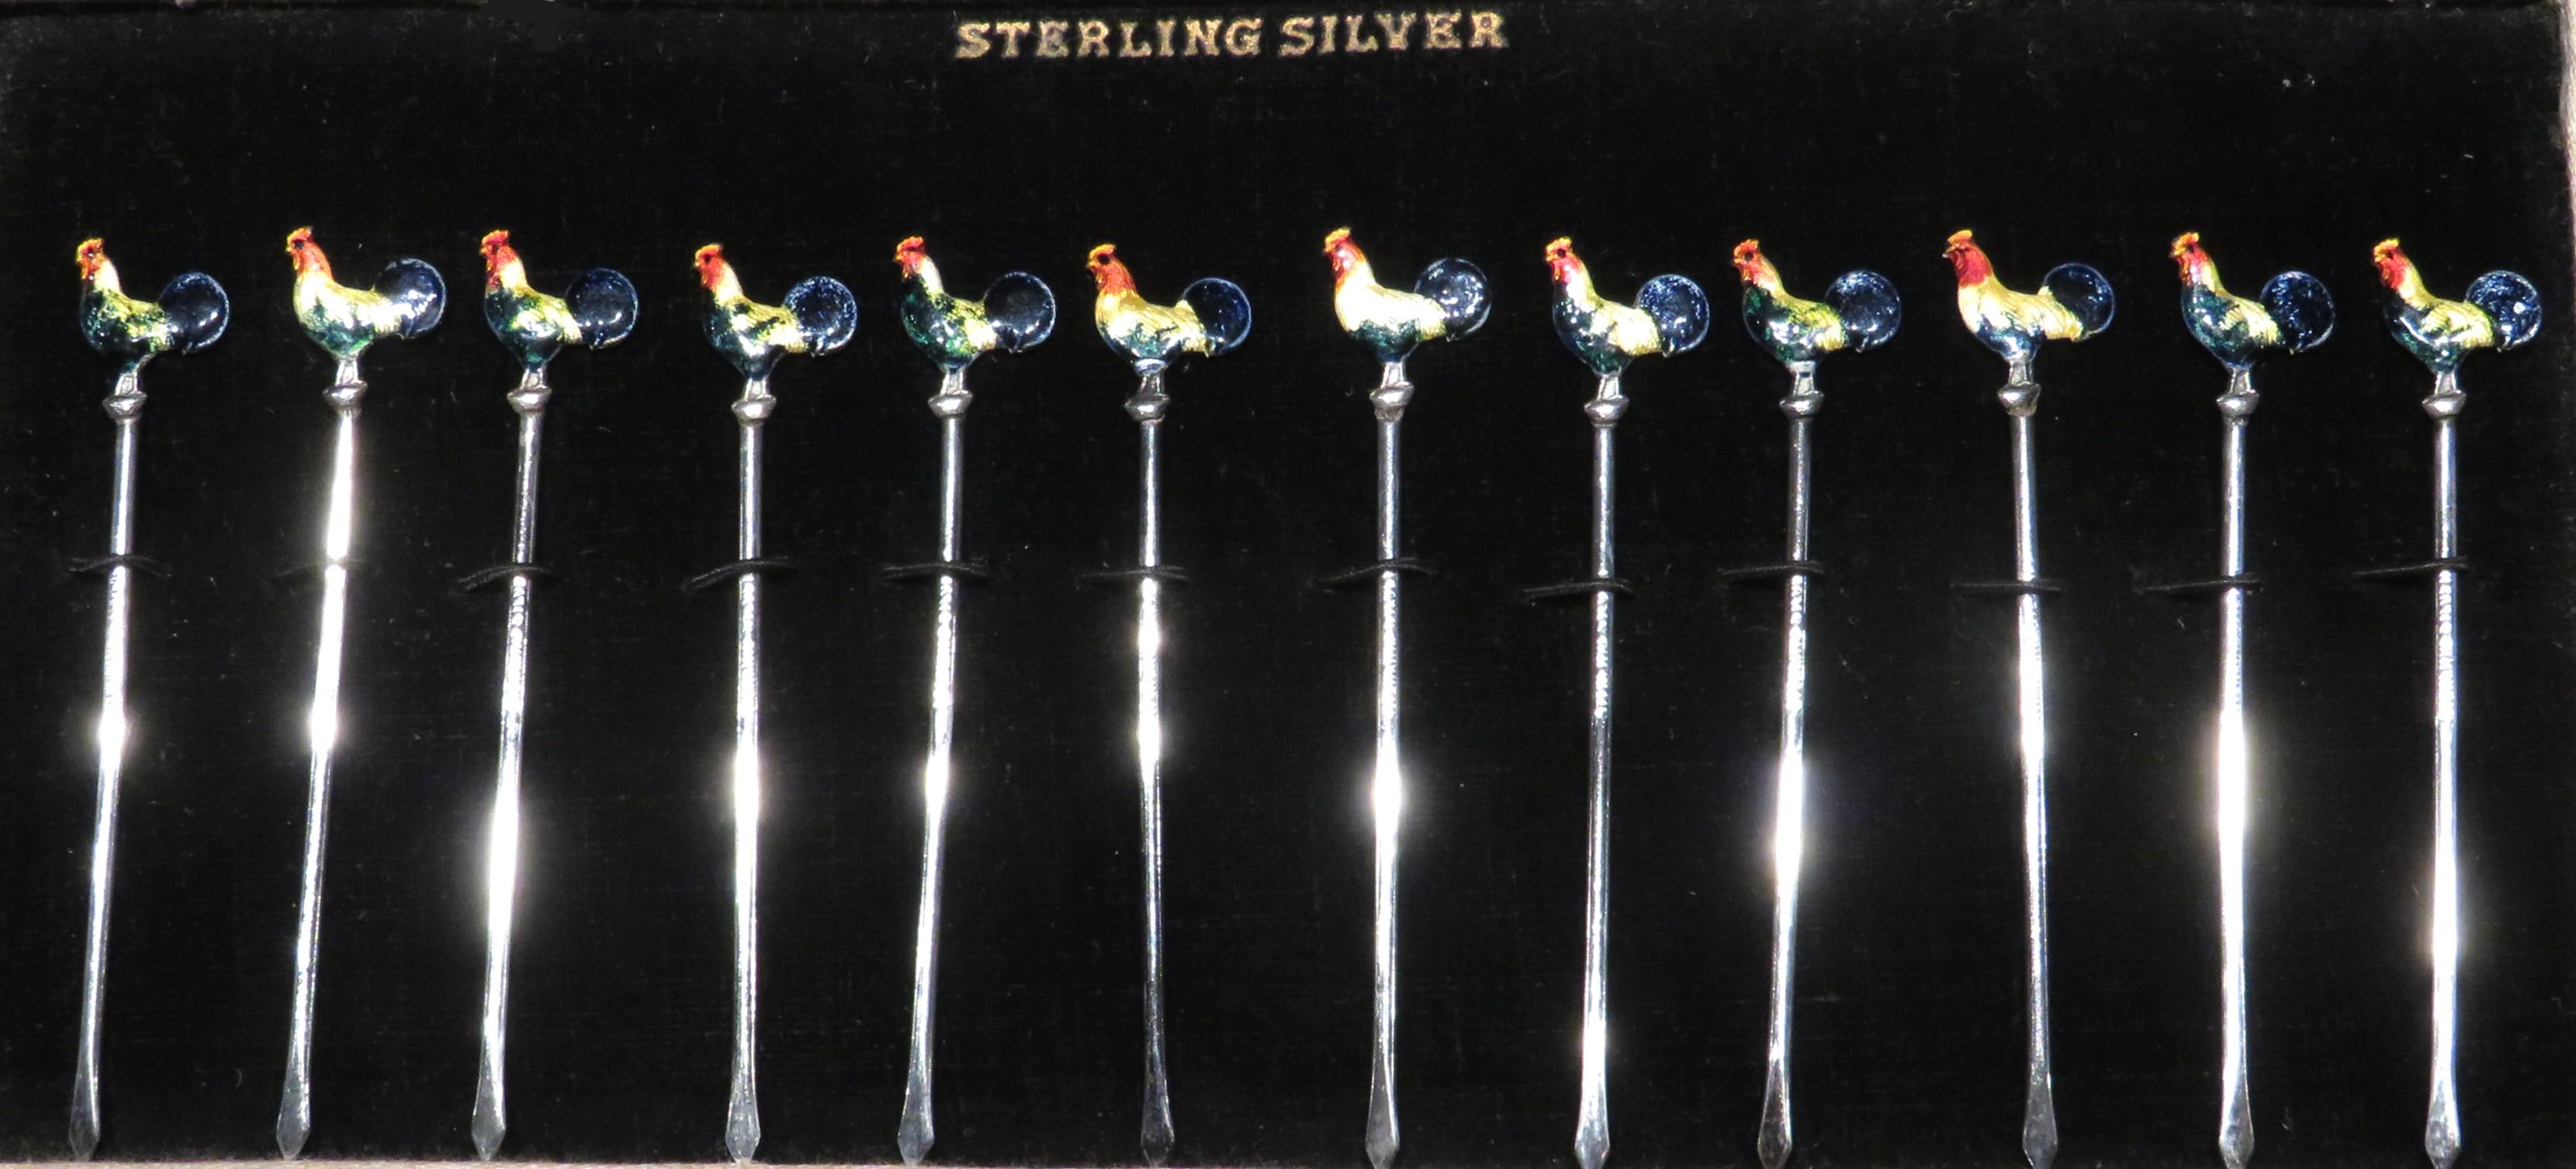 A very charming & festive set of 12 sterling silver Art Deco cocktail picks, all showing finials in the form of cockerels decorated by hand with brilliant multi-coloured enamels. All are stamped sterling silver and set within their original velvet